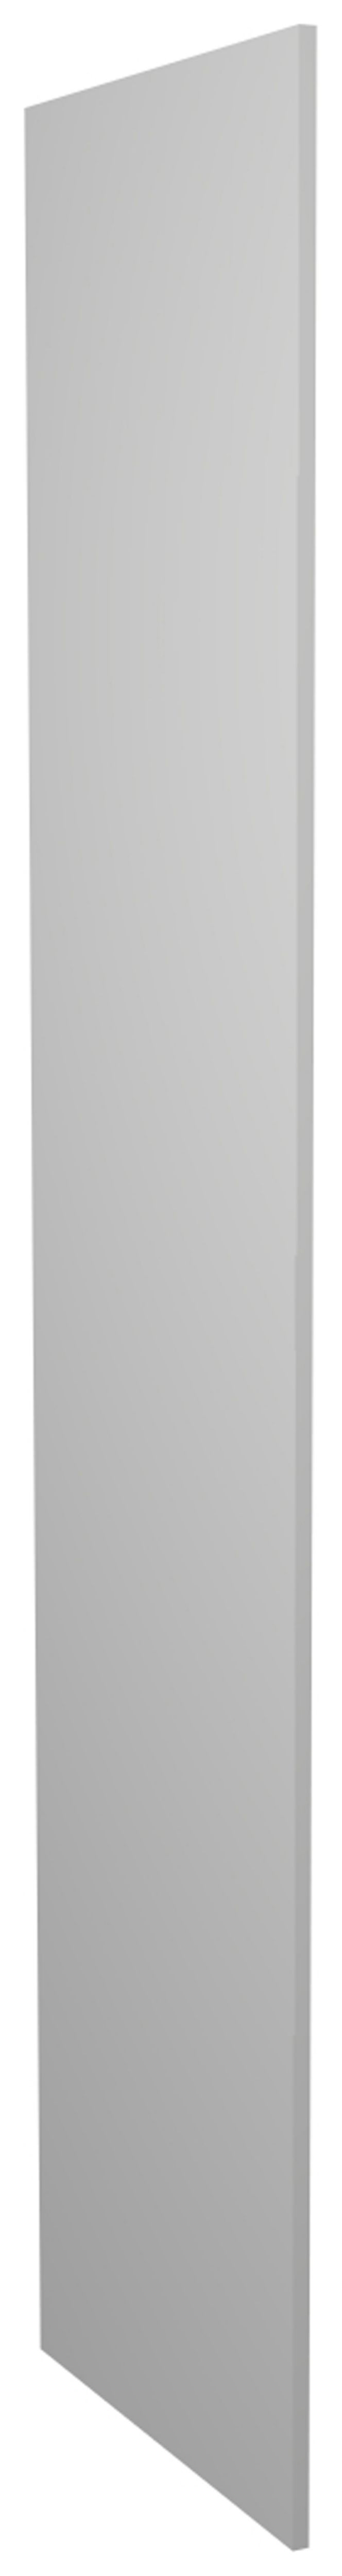 Image of Wickes Hertford Dove Grey Tower Decor End Panel - 18mm